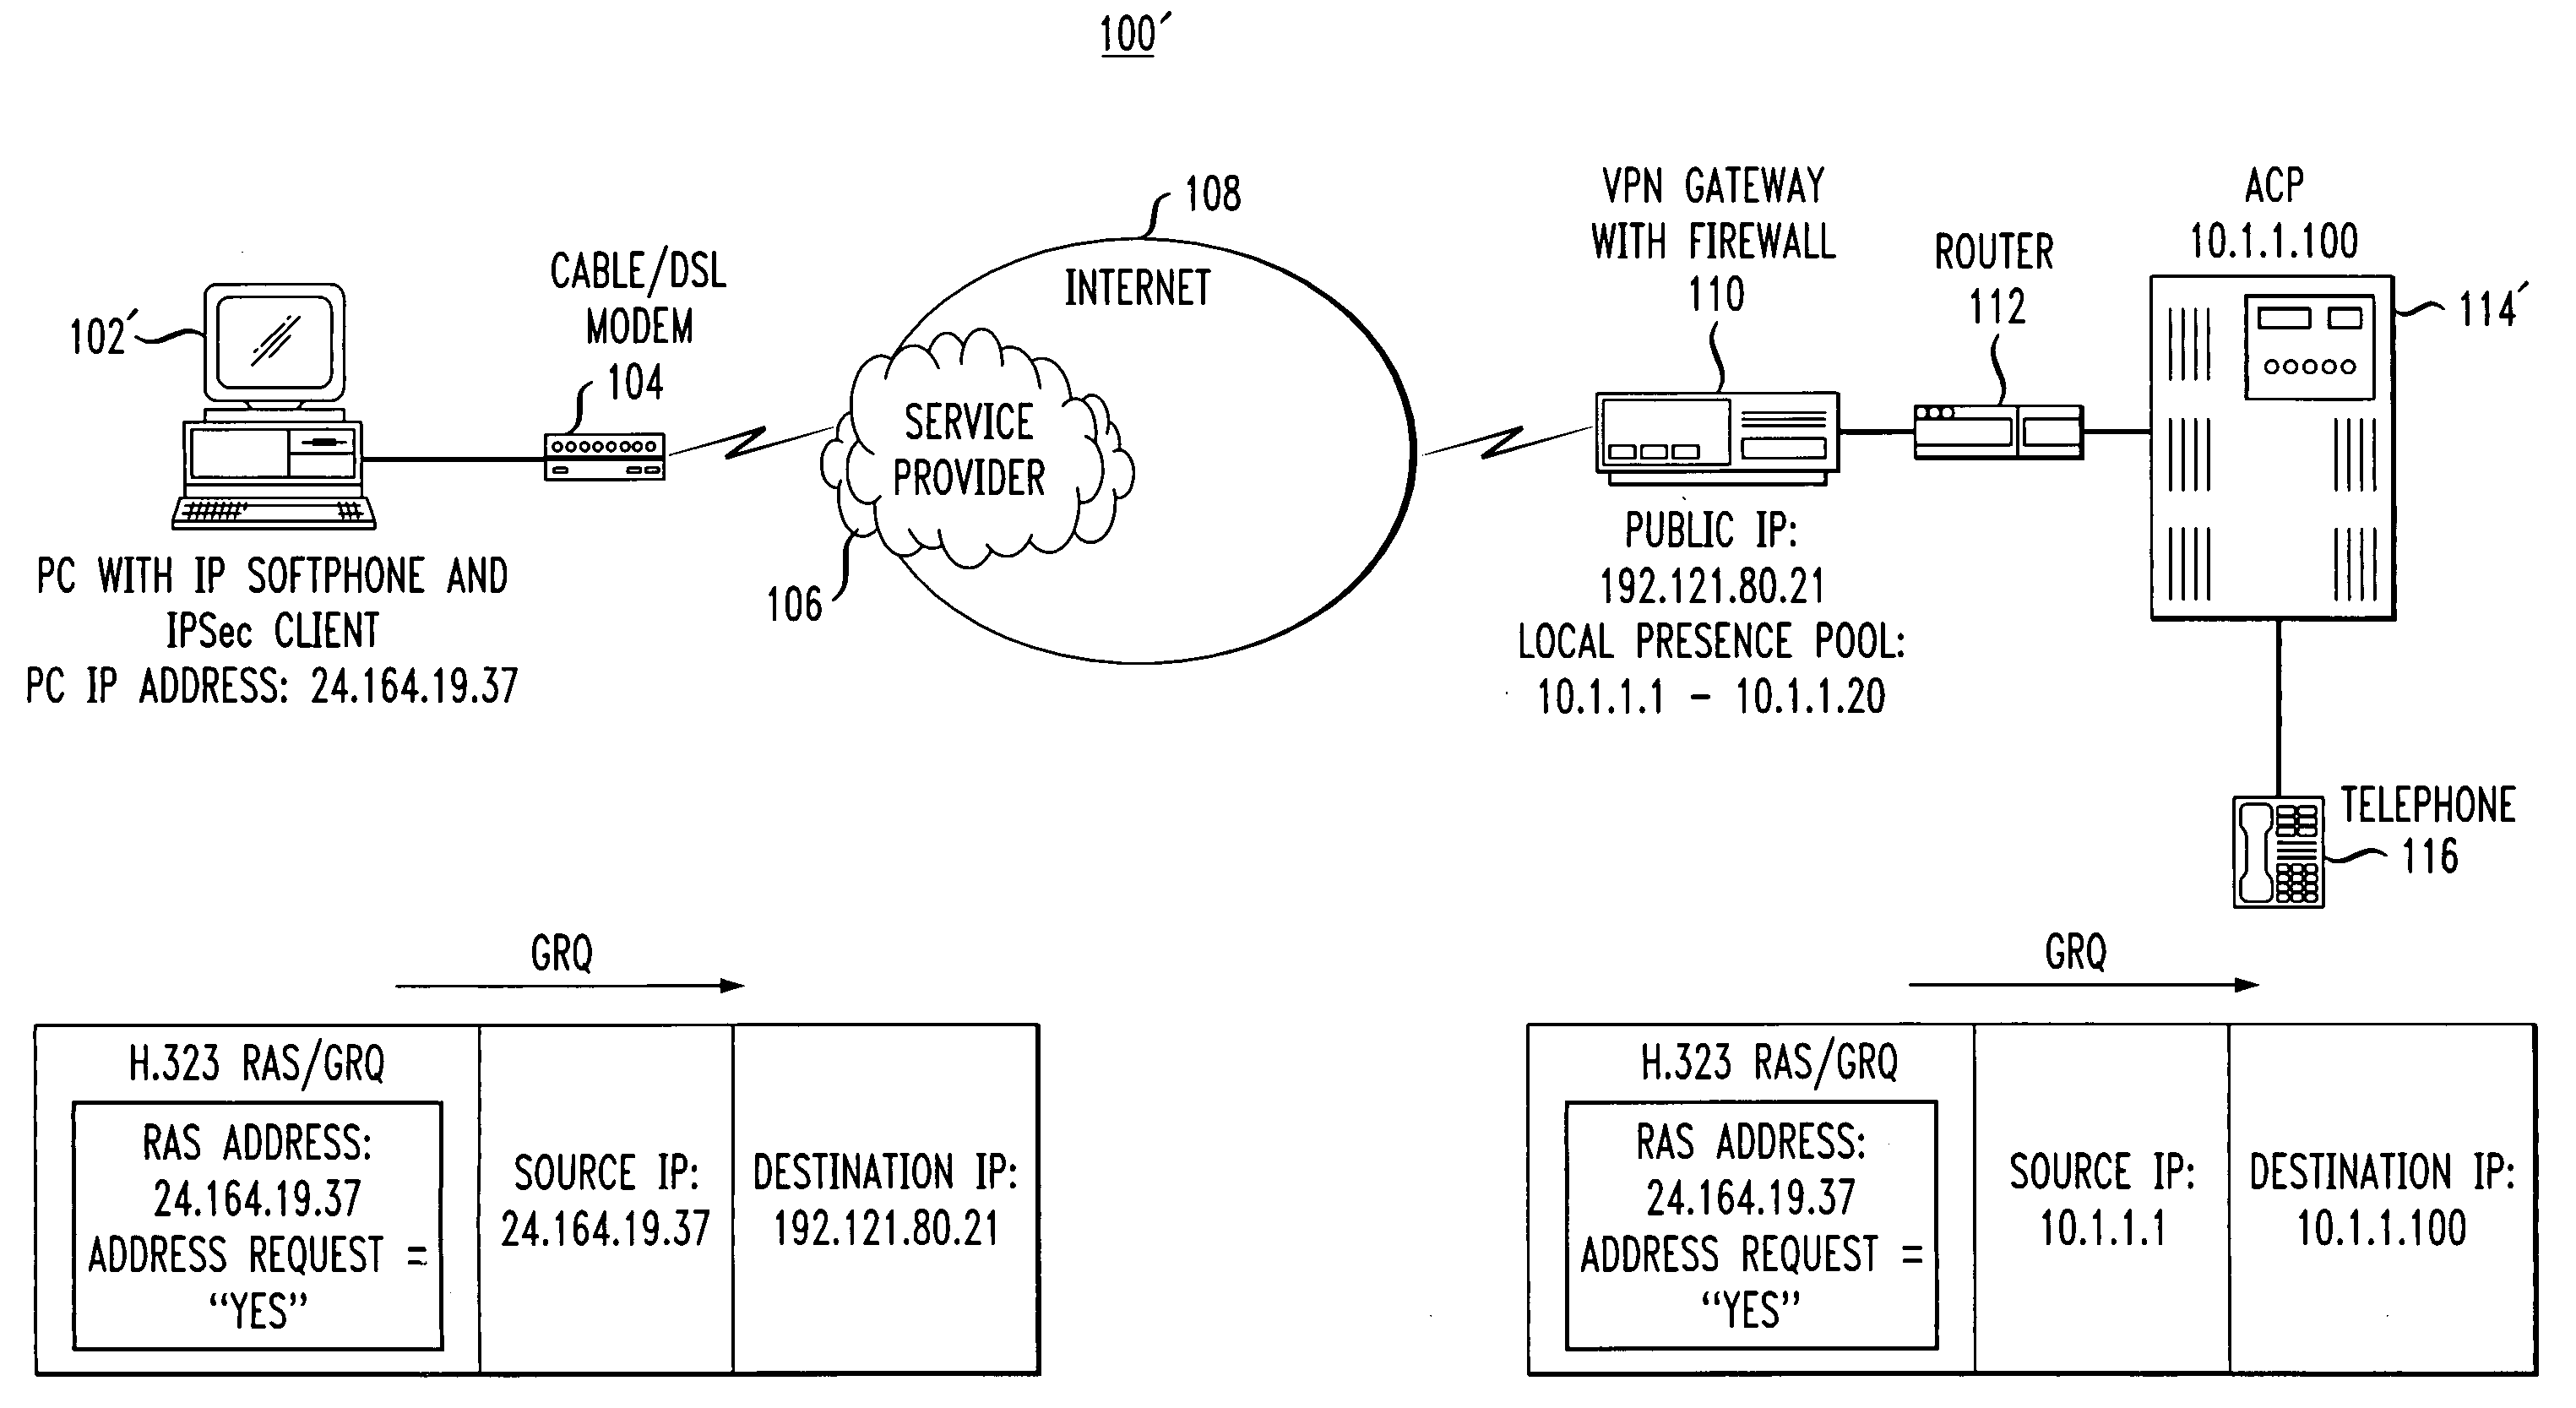 Determination of endpoint virtual address assignment in an internet telephony system